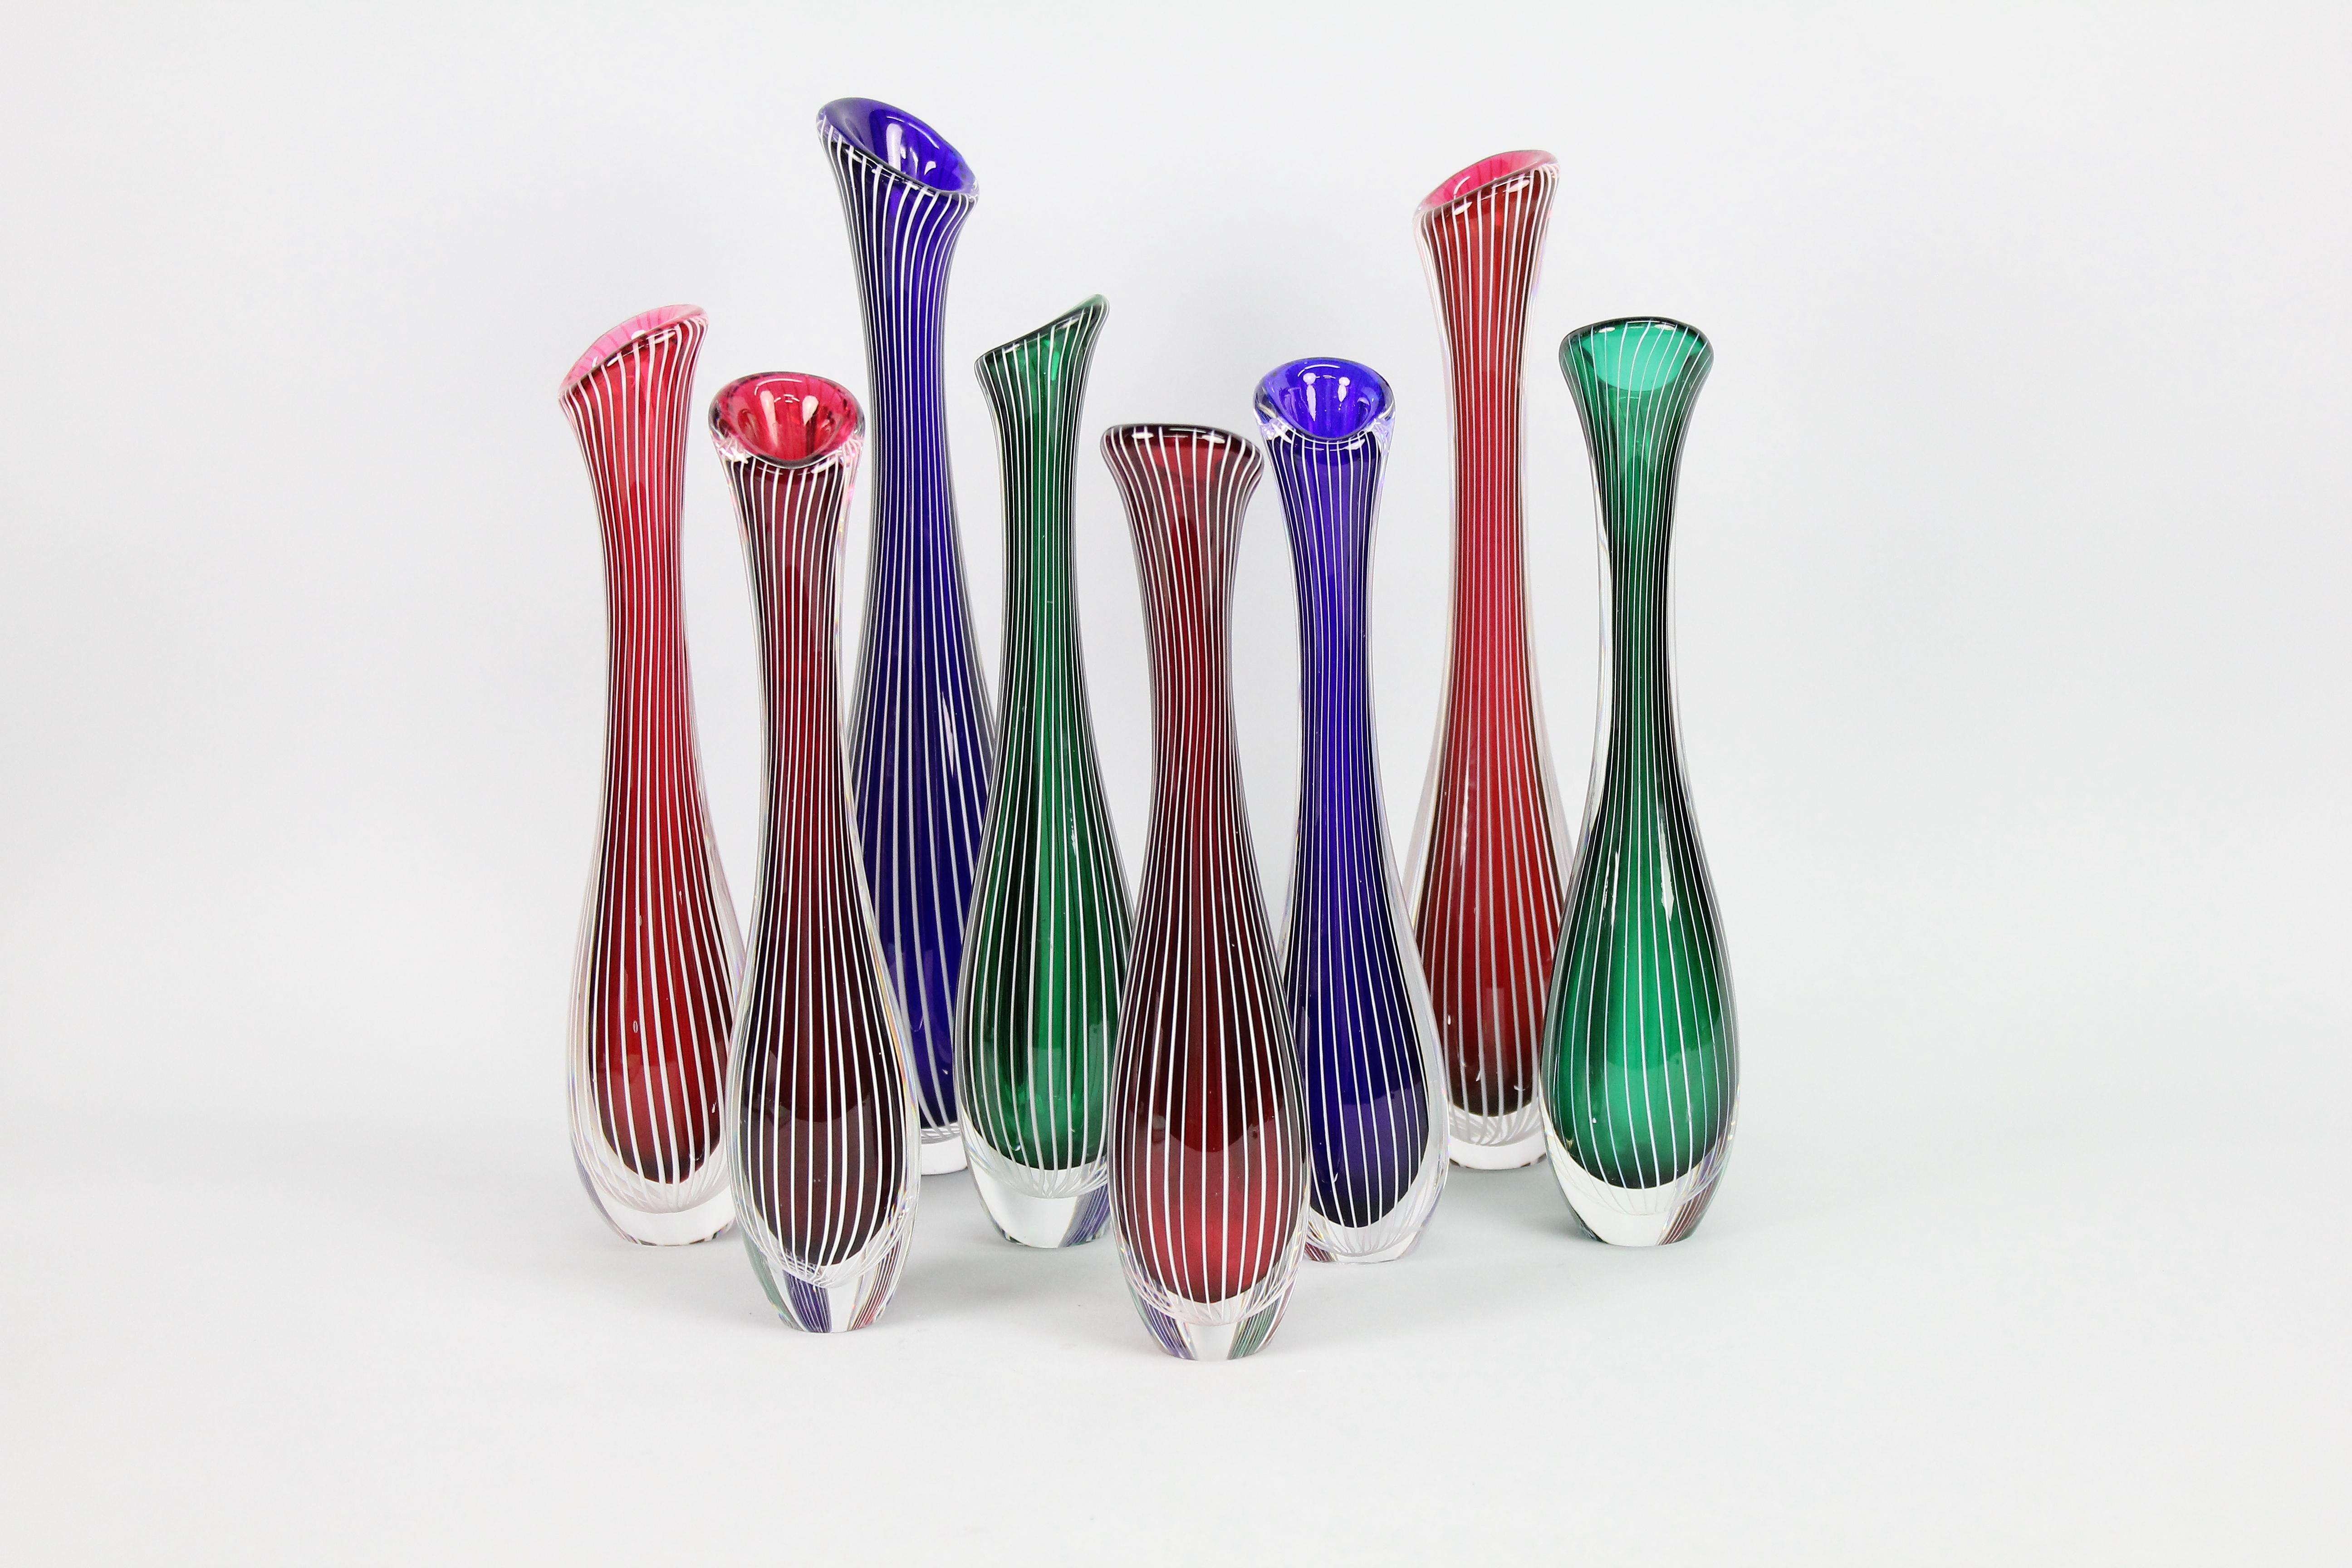 Mid-20th Century An Amazing Set of Eight 1950s Stripe Vases by Vicke Lindstrand for Kosta Sweden. For Sale